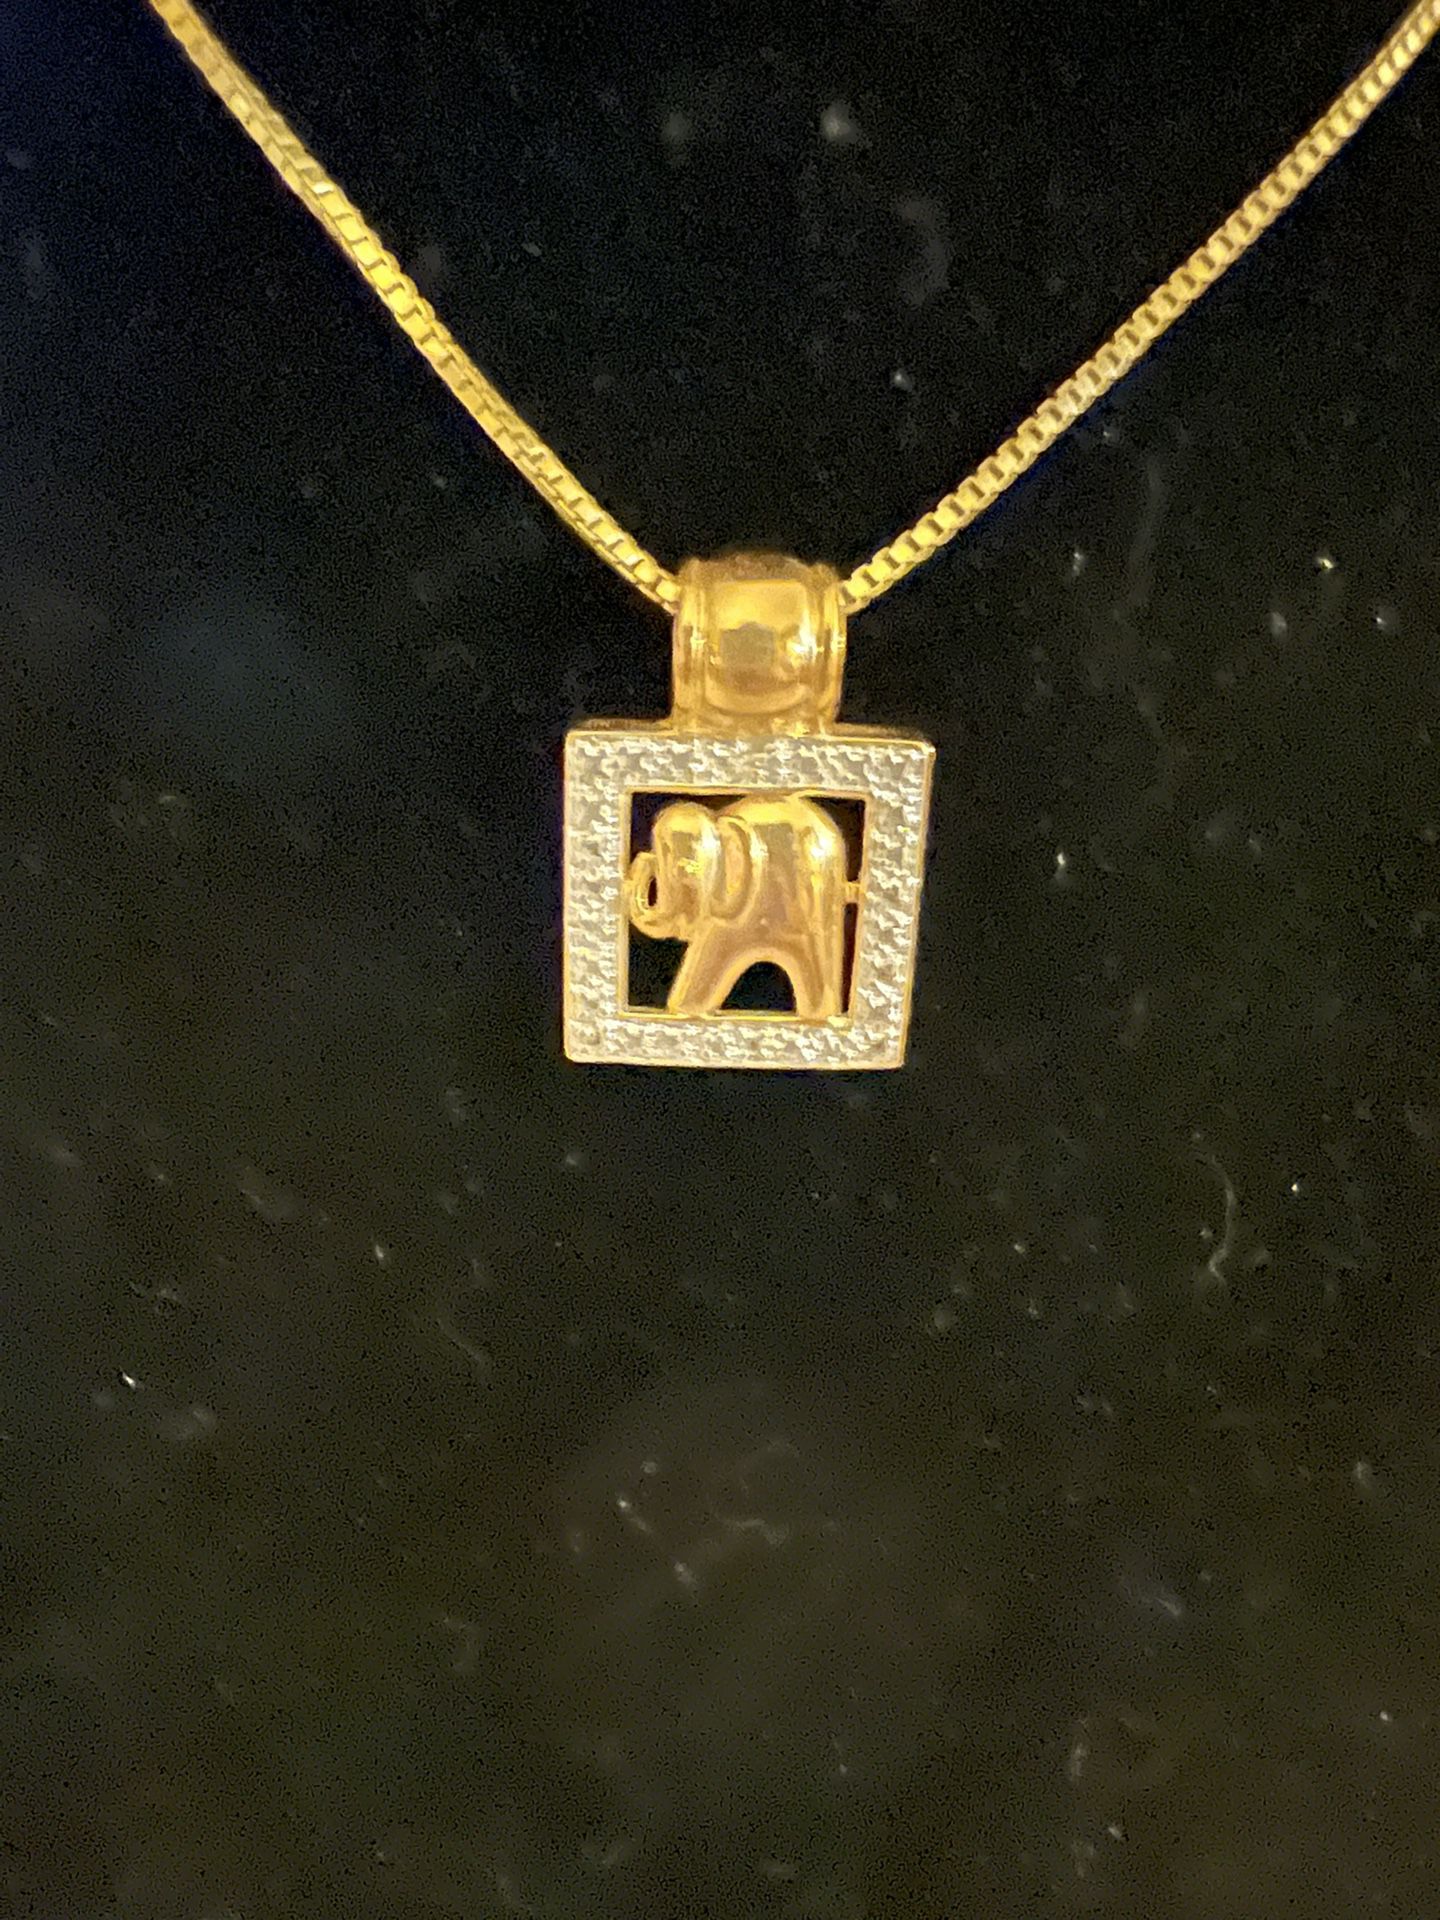 Golden Elephant And Pave Diamonds Chain Not Included